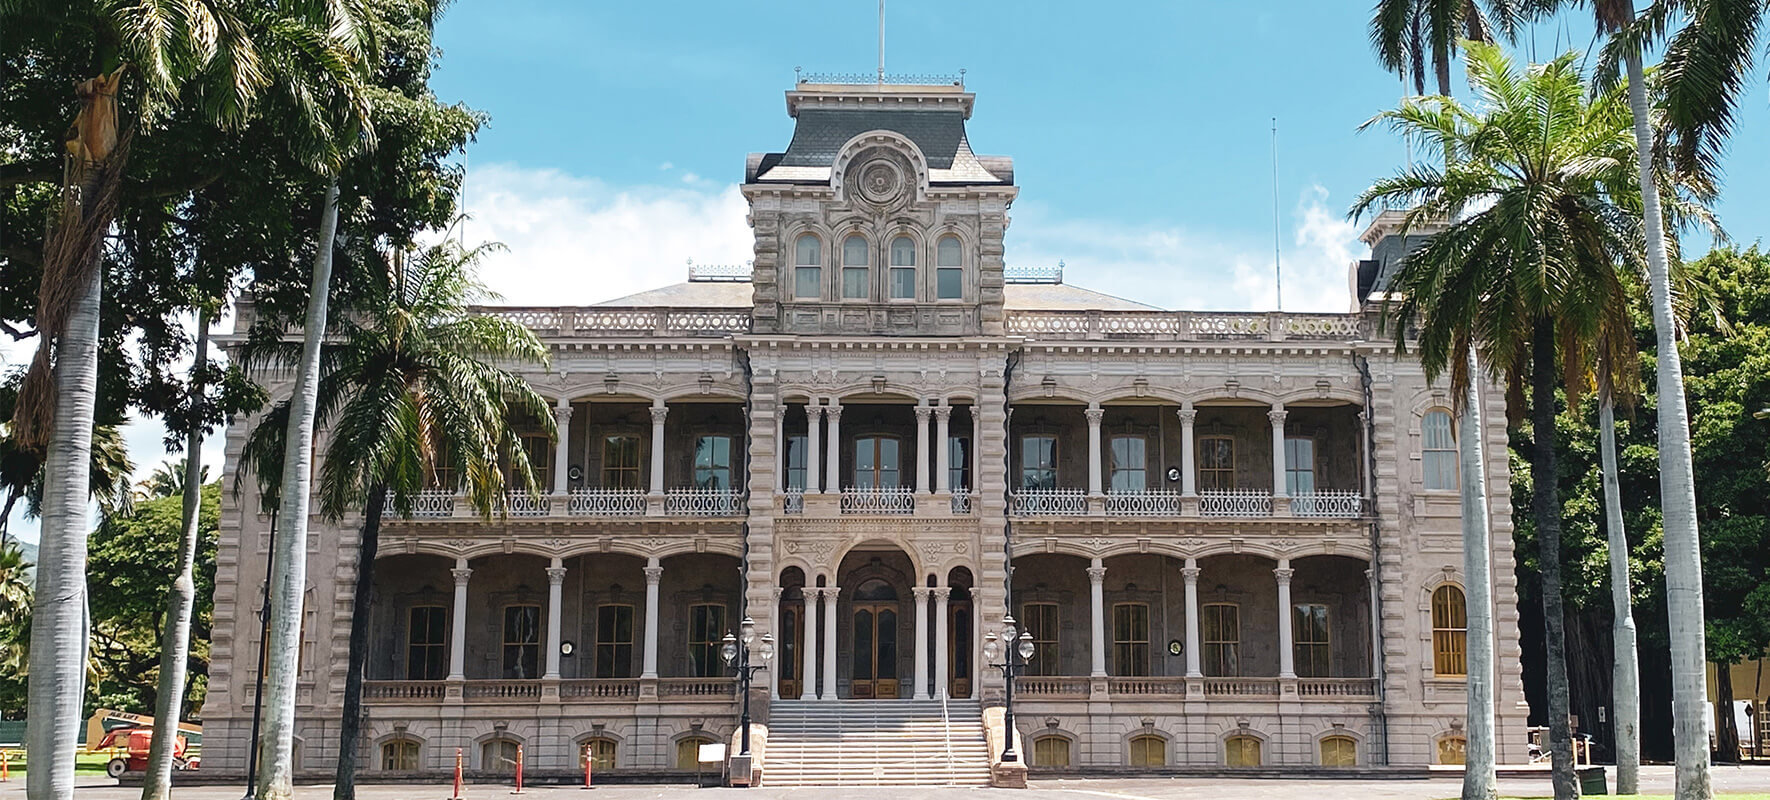 Iolani Palace was and continues to be the only official royal residence in the United States